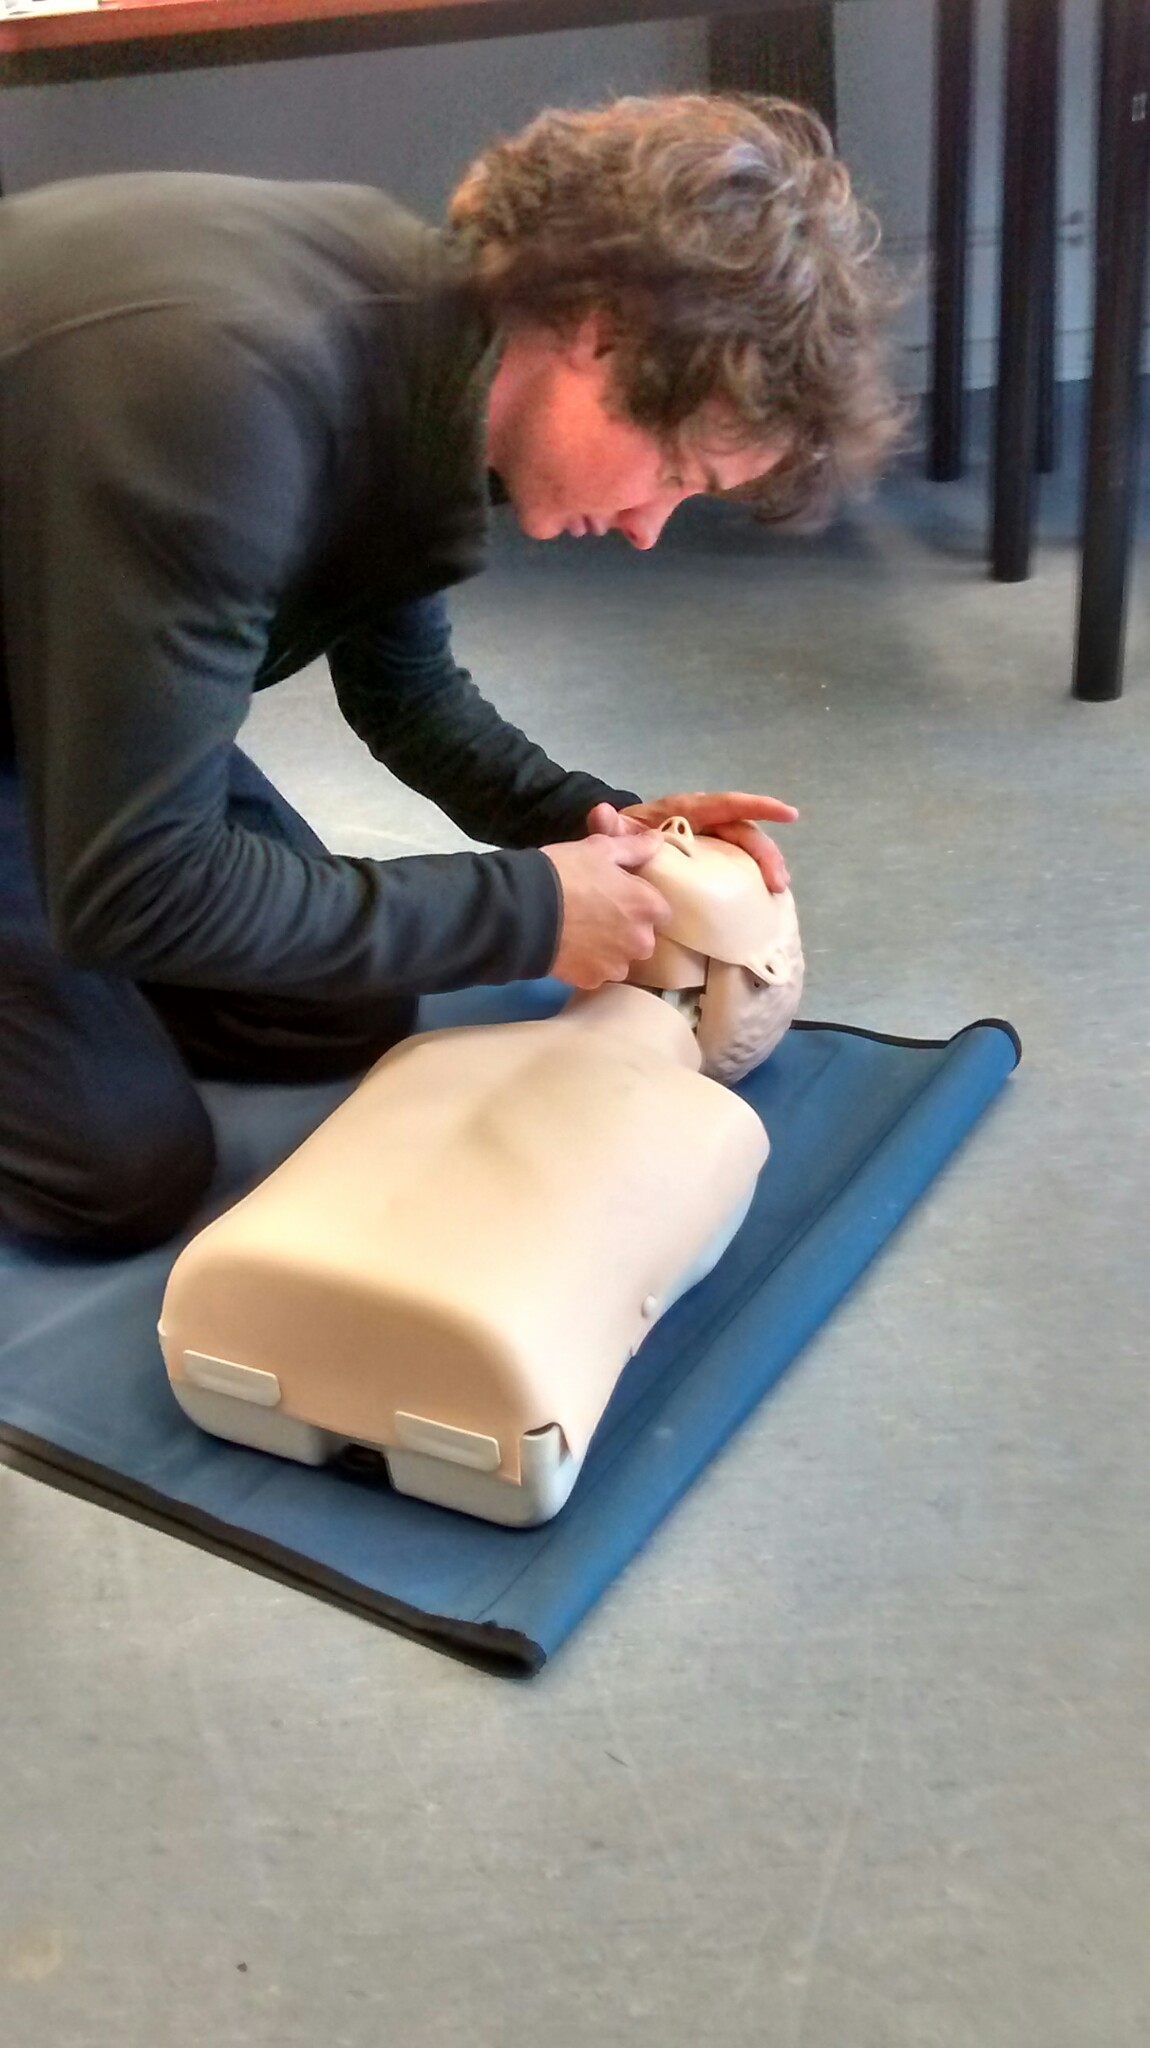 First Aid courses in Greater Manchester and the Peak District